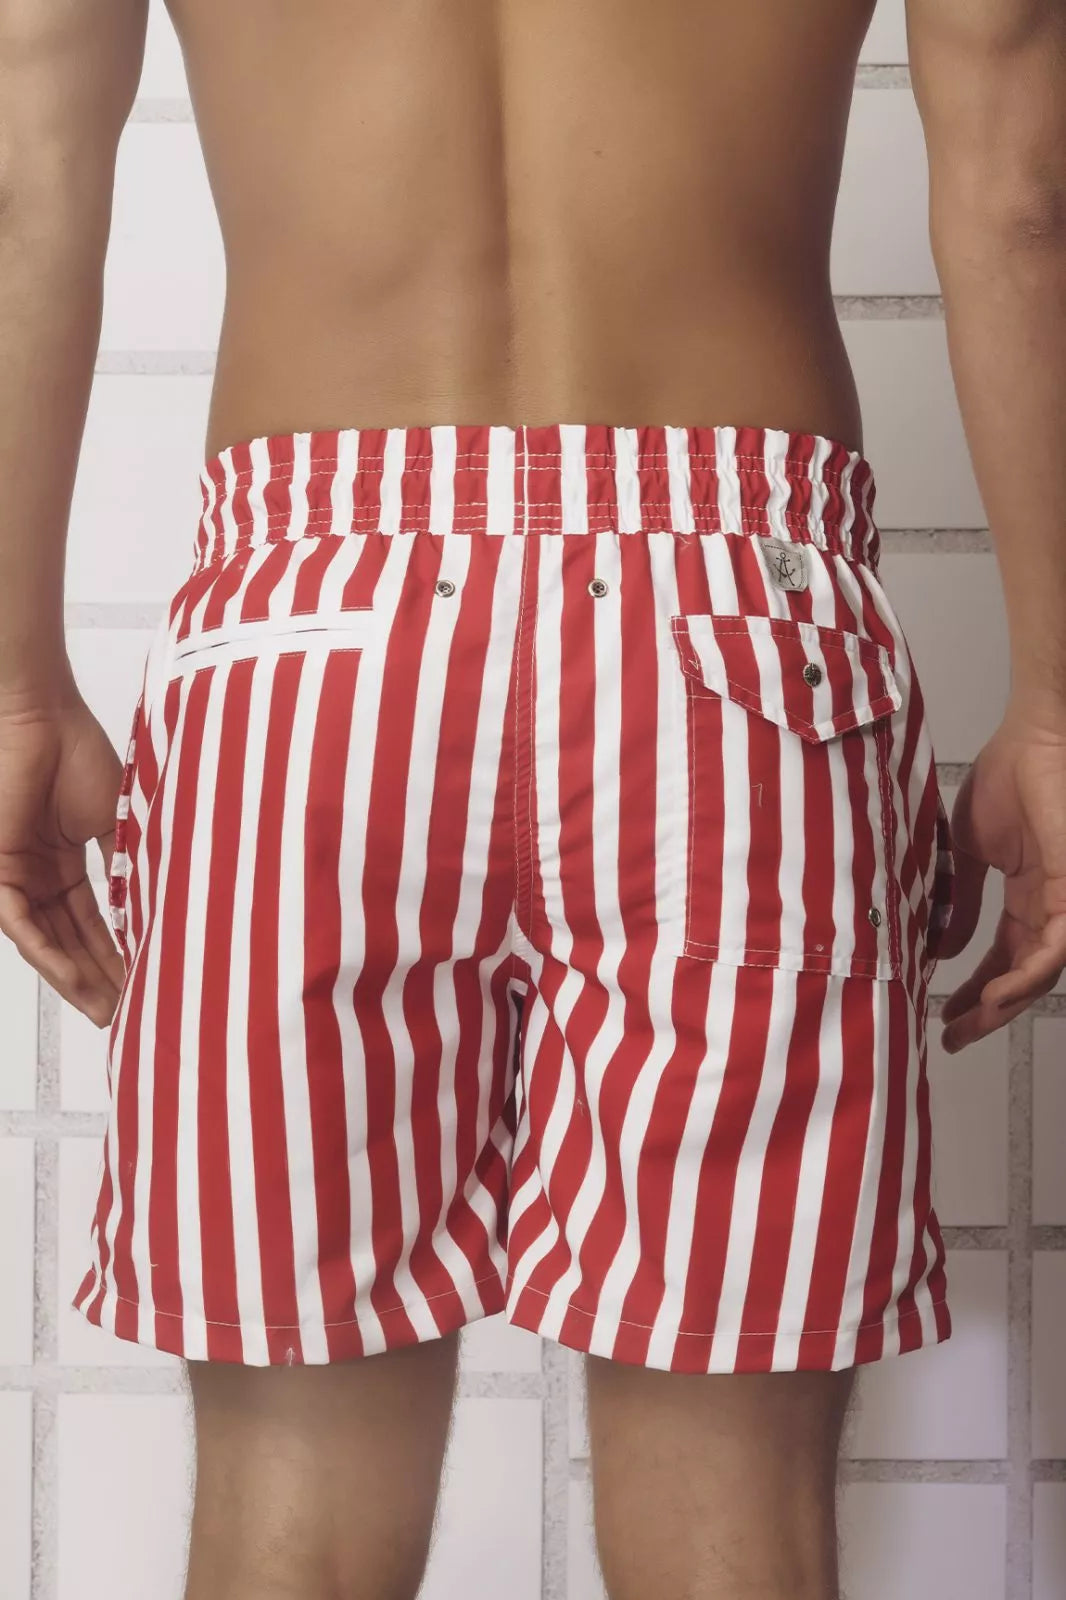 Swim Trunk Tub and Stripes Hot Red - ANCORA